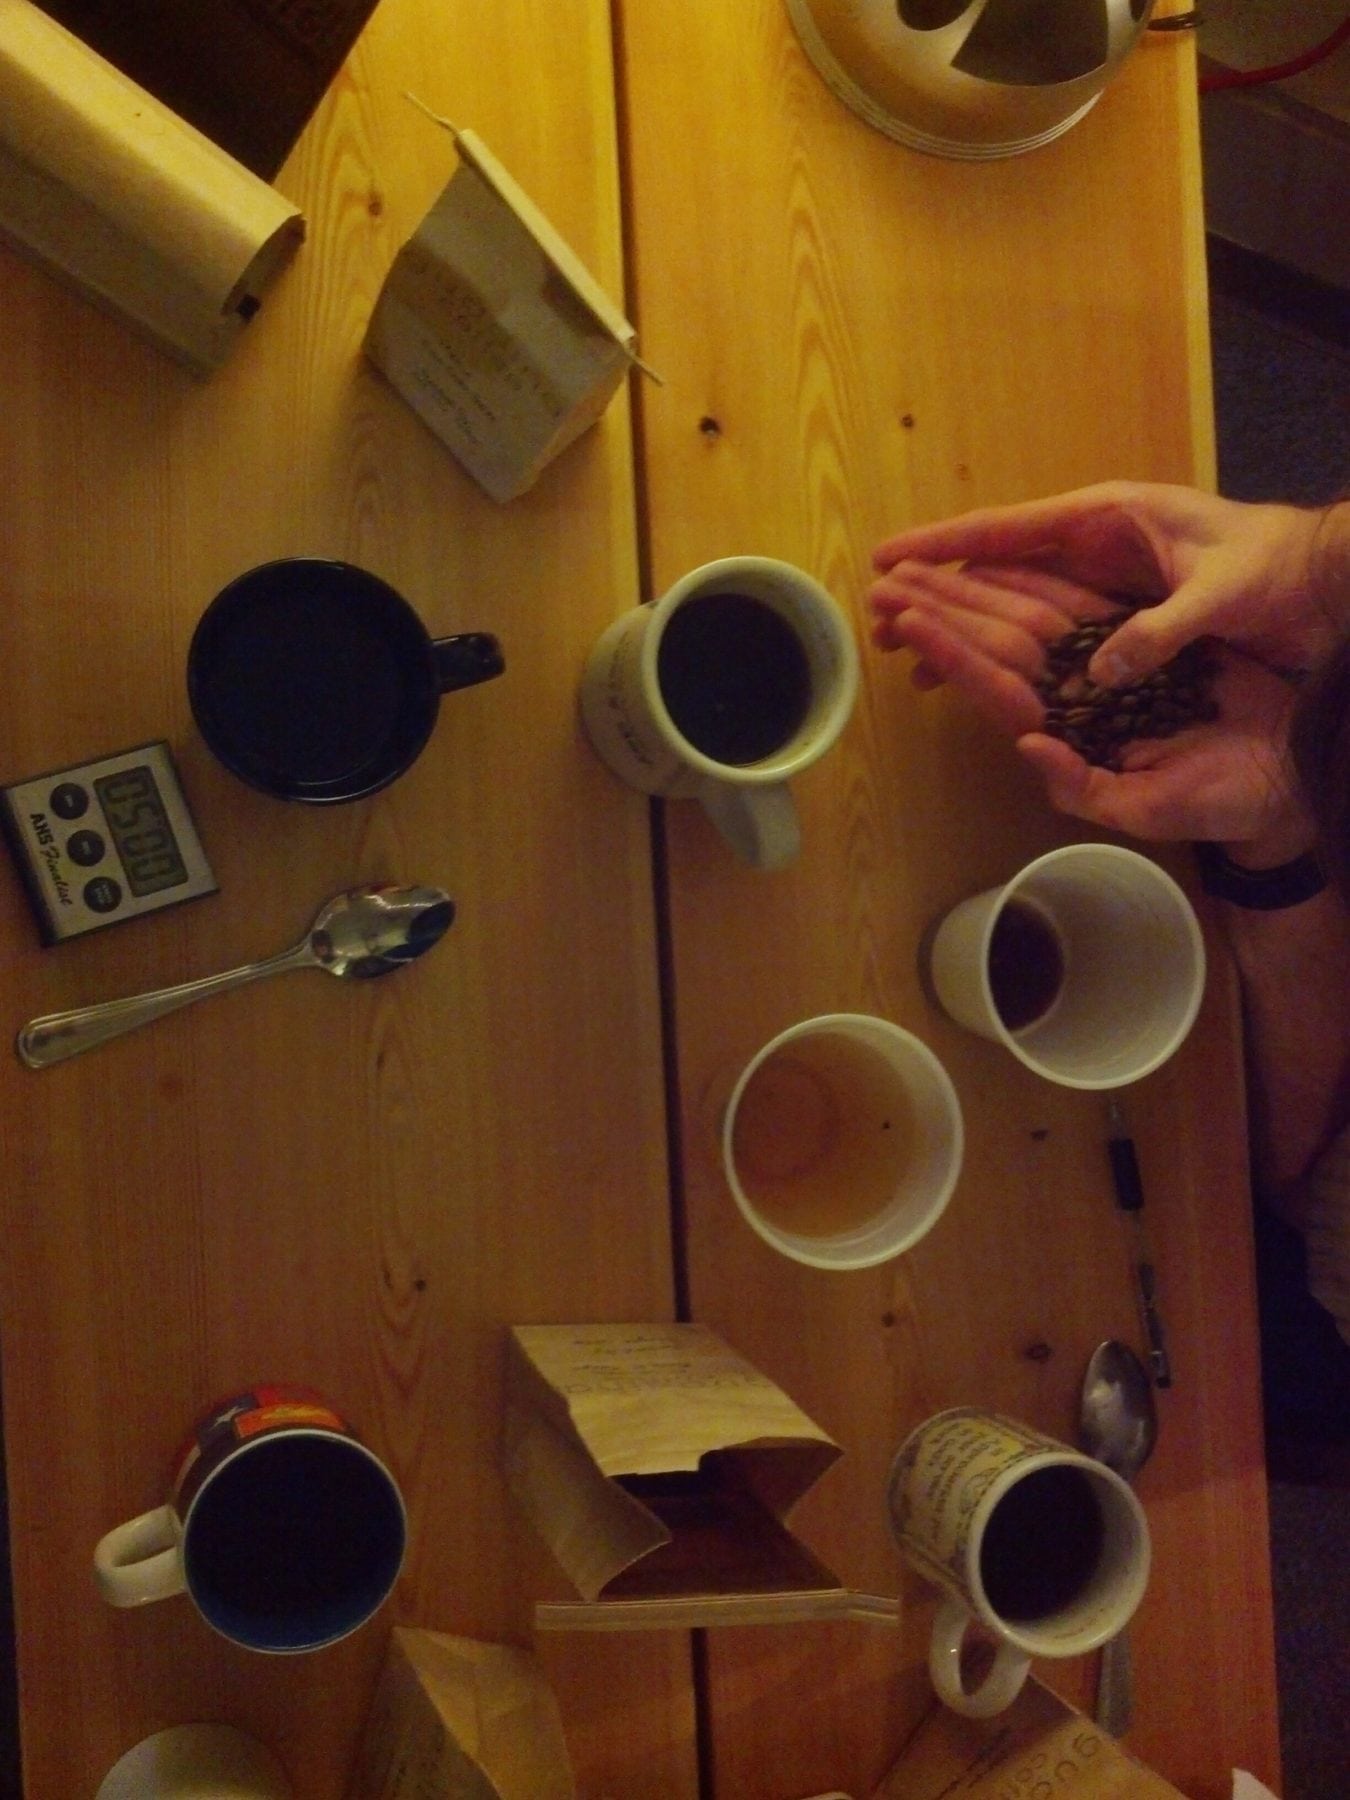 How My First Coffee Cupping Experience Humbled Me